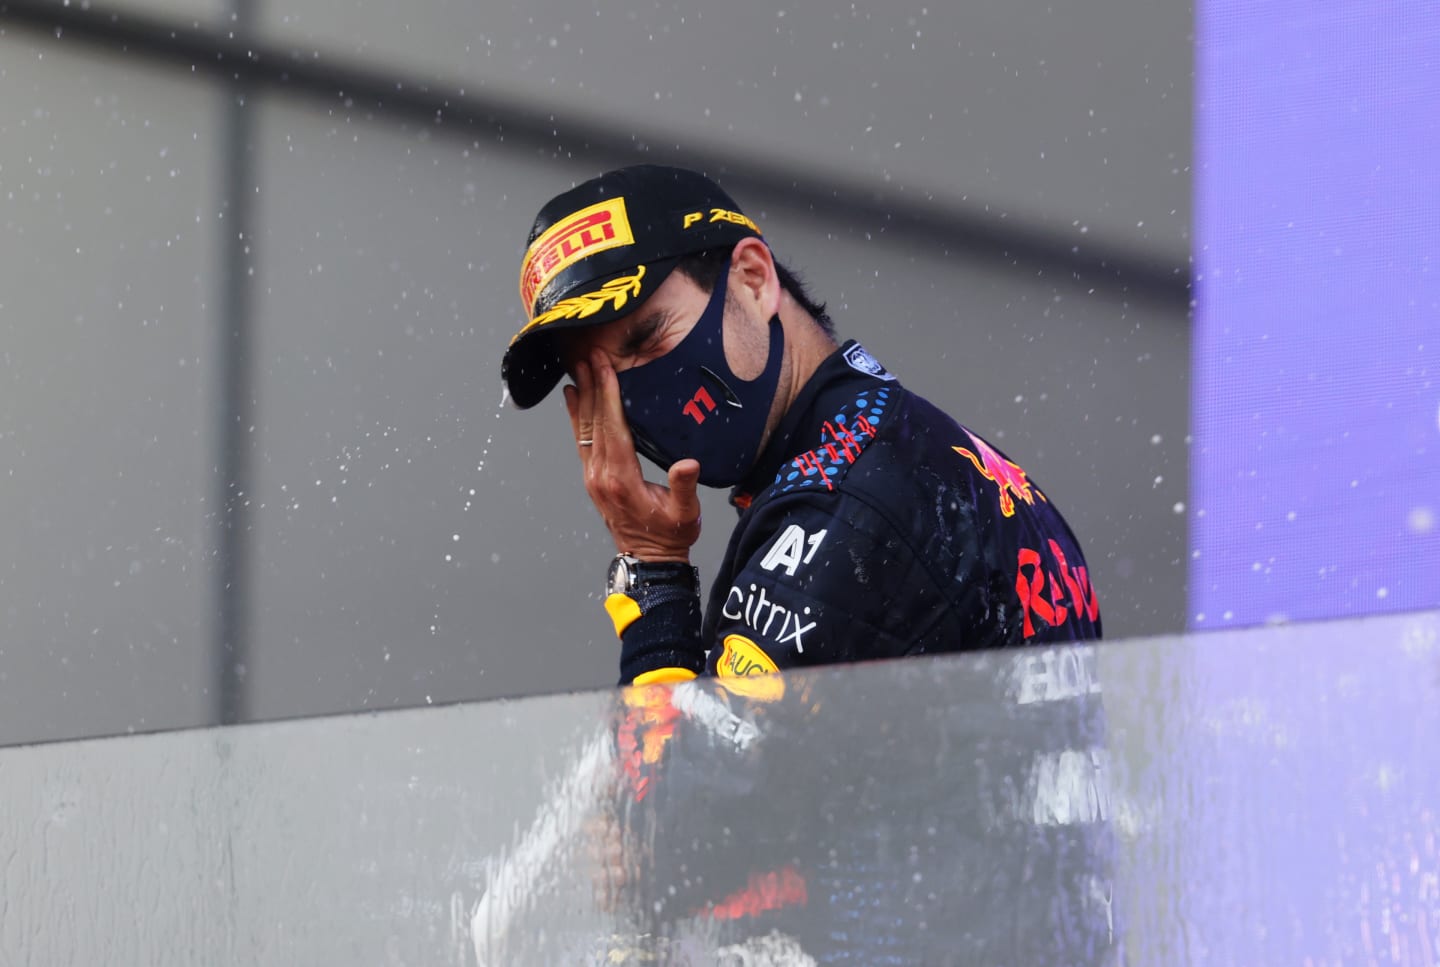 BAKU, AZERBAIJAN - JUNE 06: Race winner Sergio Perez of Mexico and Red Bull Racing celebrates with sparkling wine on the podium during the F1 Grand Prix of Azerbaijan at Baku City Circuit on June 06, 2021 in Baku, Azerbaijan. (Photo by Clive Rose/Getty Images)